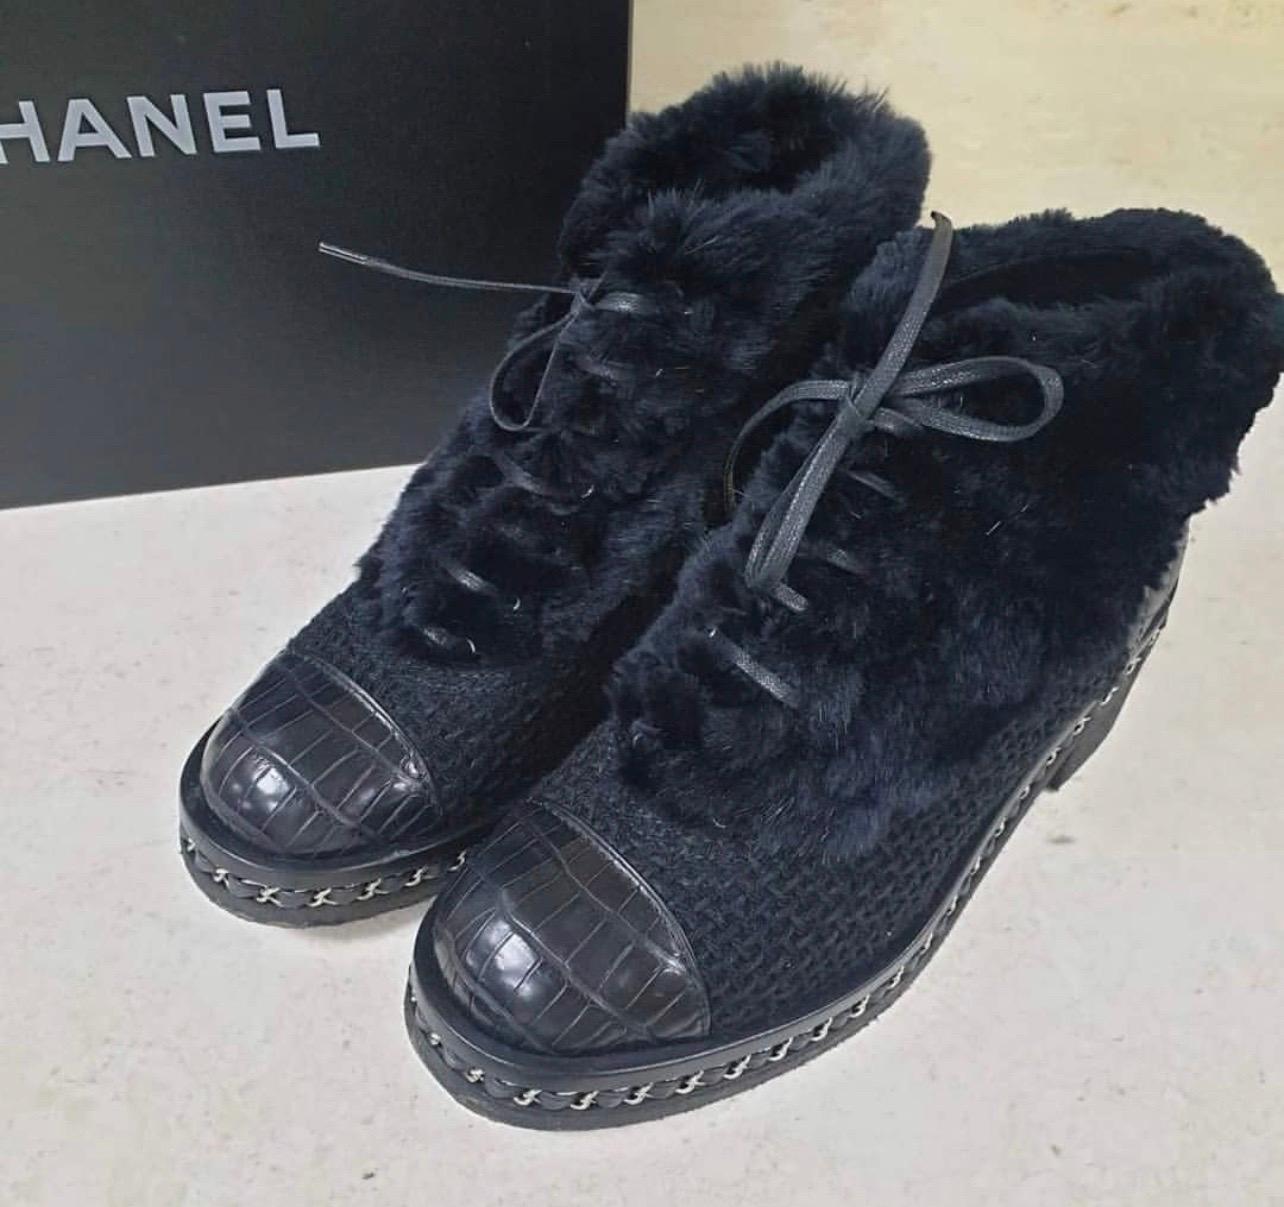 Chanel ankle boots in black rubbit fur, black bouclé and quilted leather heel featuring a black croco embossed leather tip. 
Rubber sole with silver-tone signature chain detail around. 
Lined in blackleather.
sz.40
Condition is very good.
No box.No